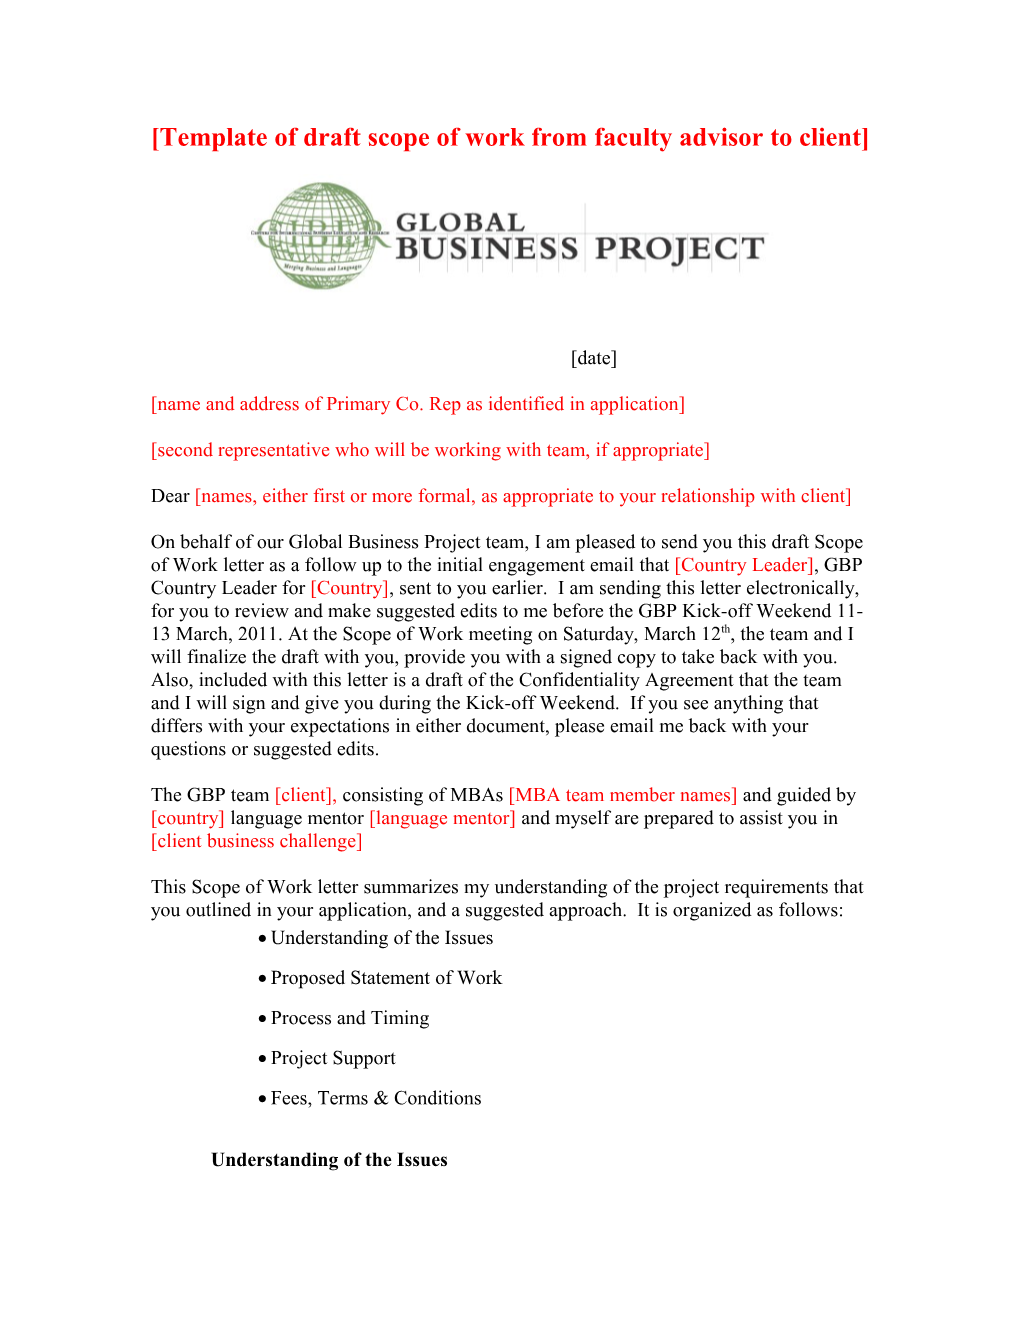 This Email Is to Let You Know That We Are Accepting Project Applications for GBP Global